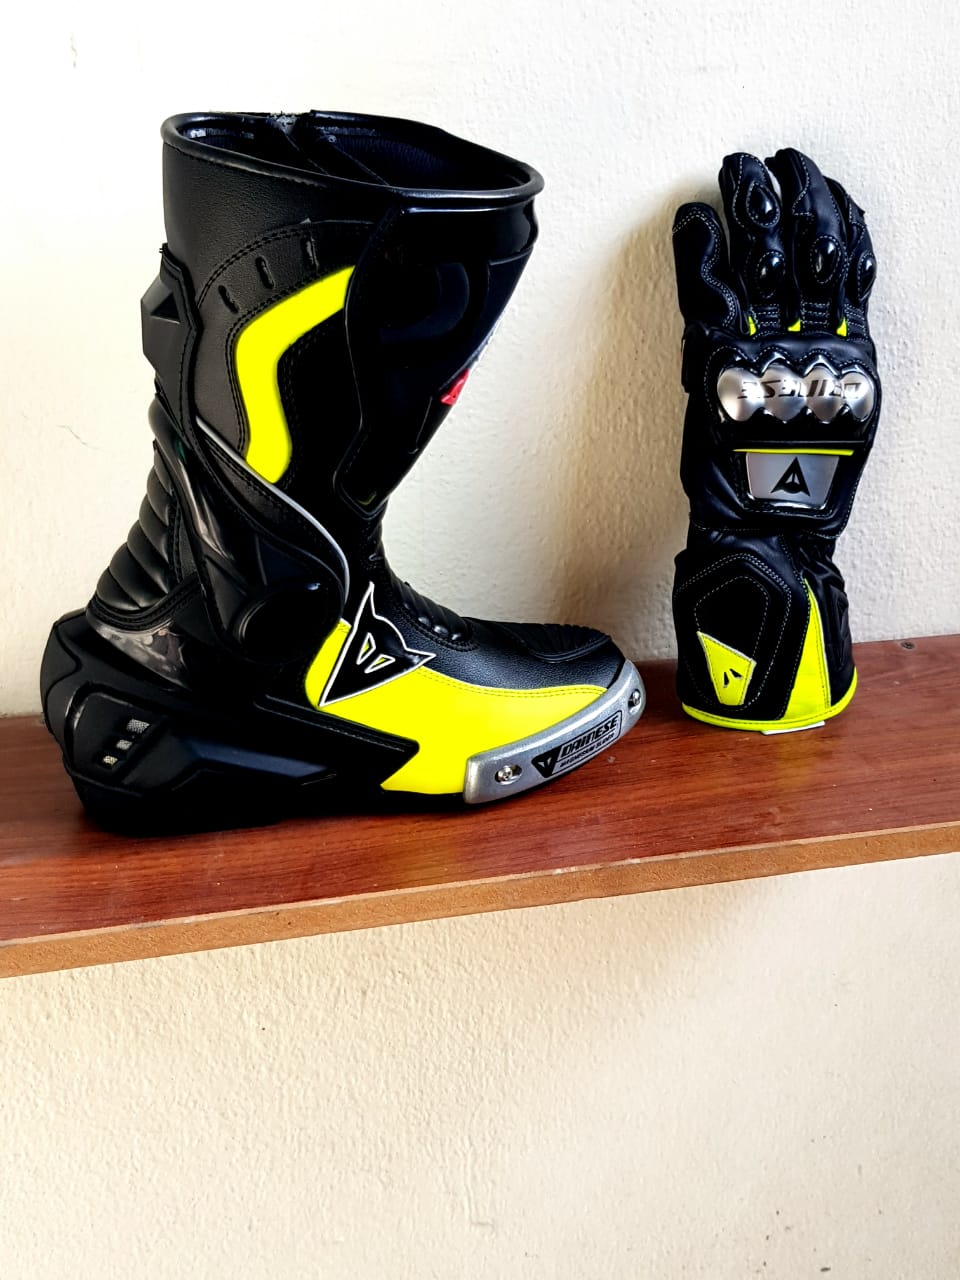 UGG-011 Black Yellow Motorcycle Motorbike Leather Racing Gloves and Shoes